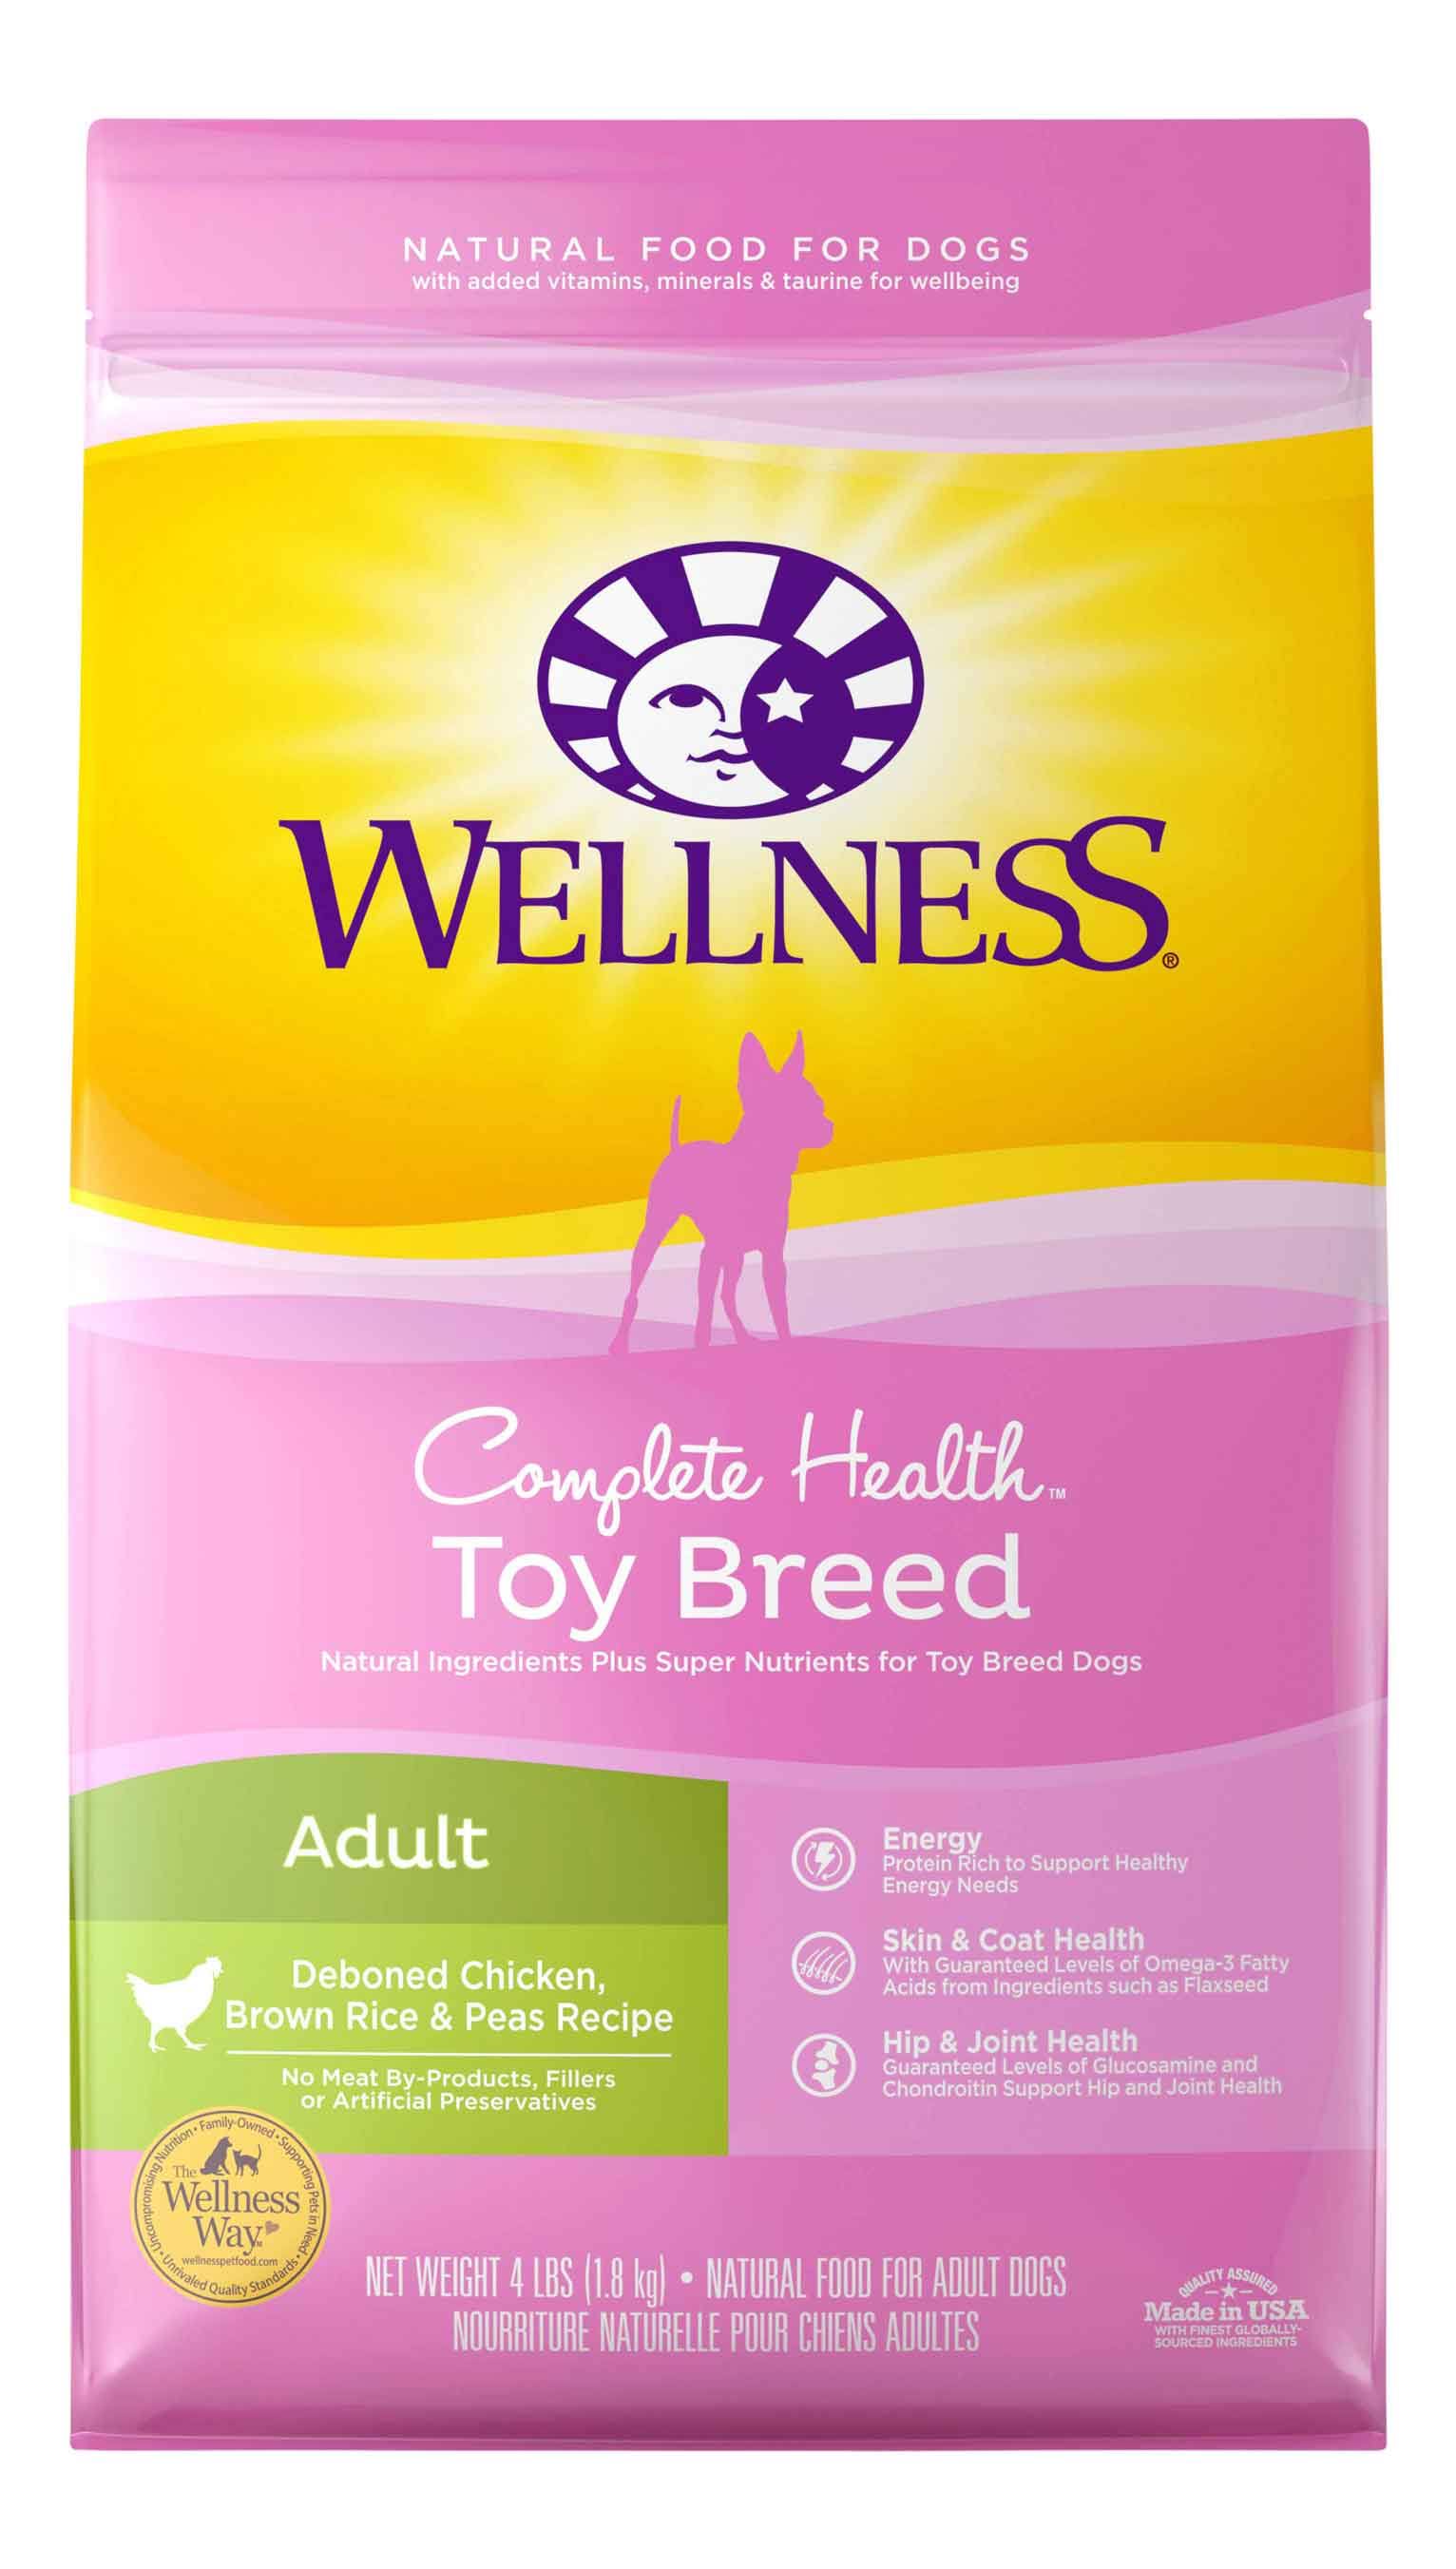 Wellness Toy Breed Complete Health Dog Food - Chicken Brown Rice and Peas, Adult